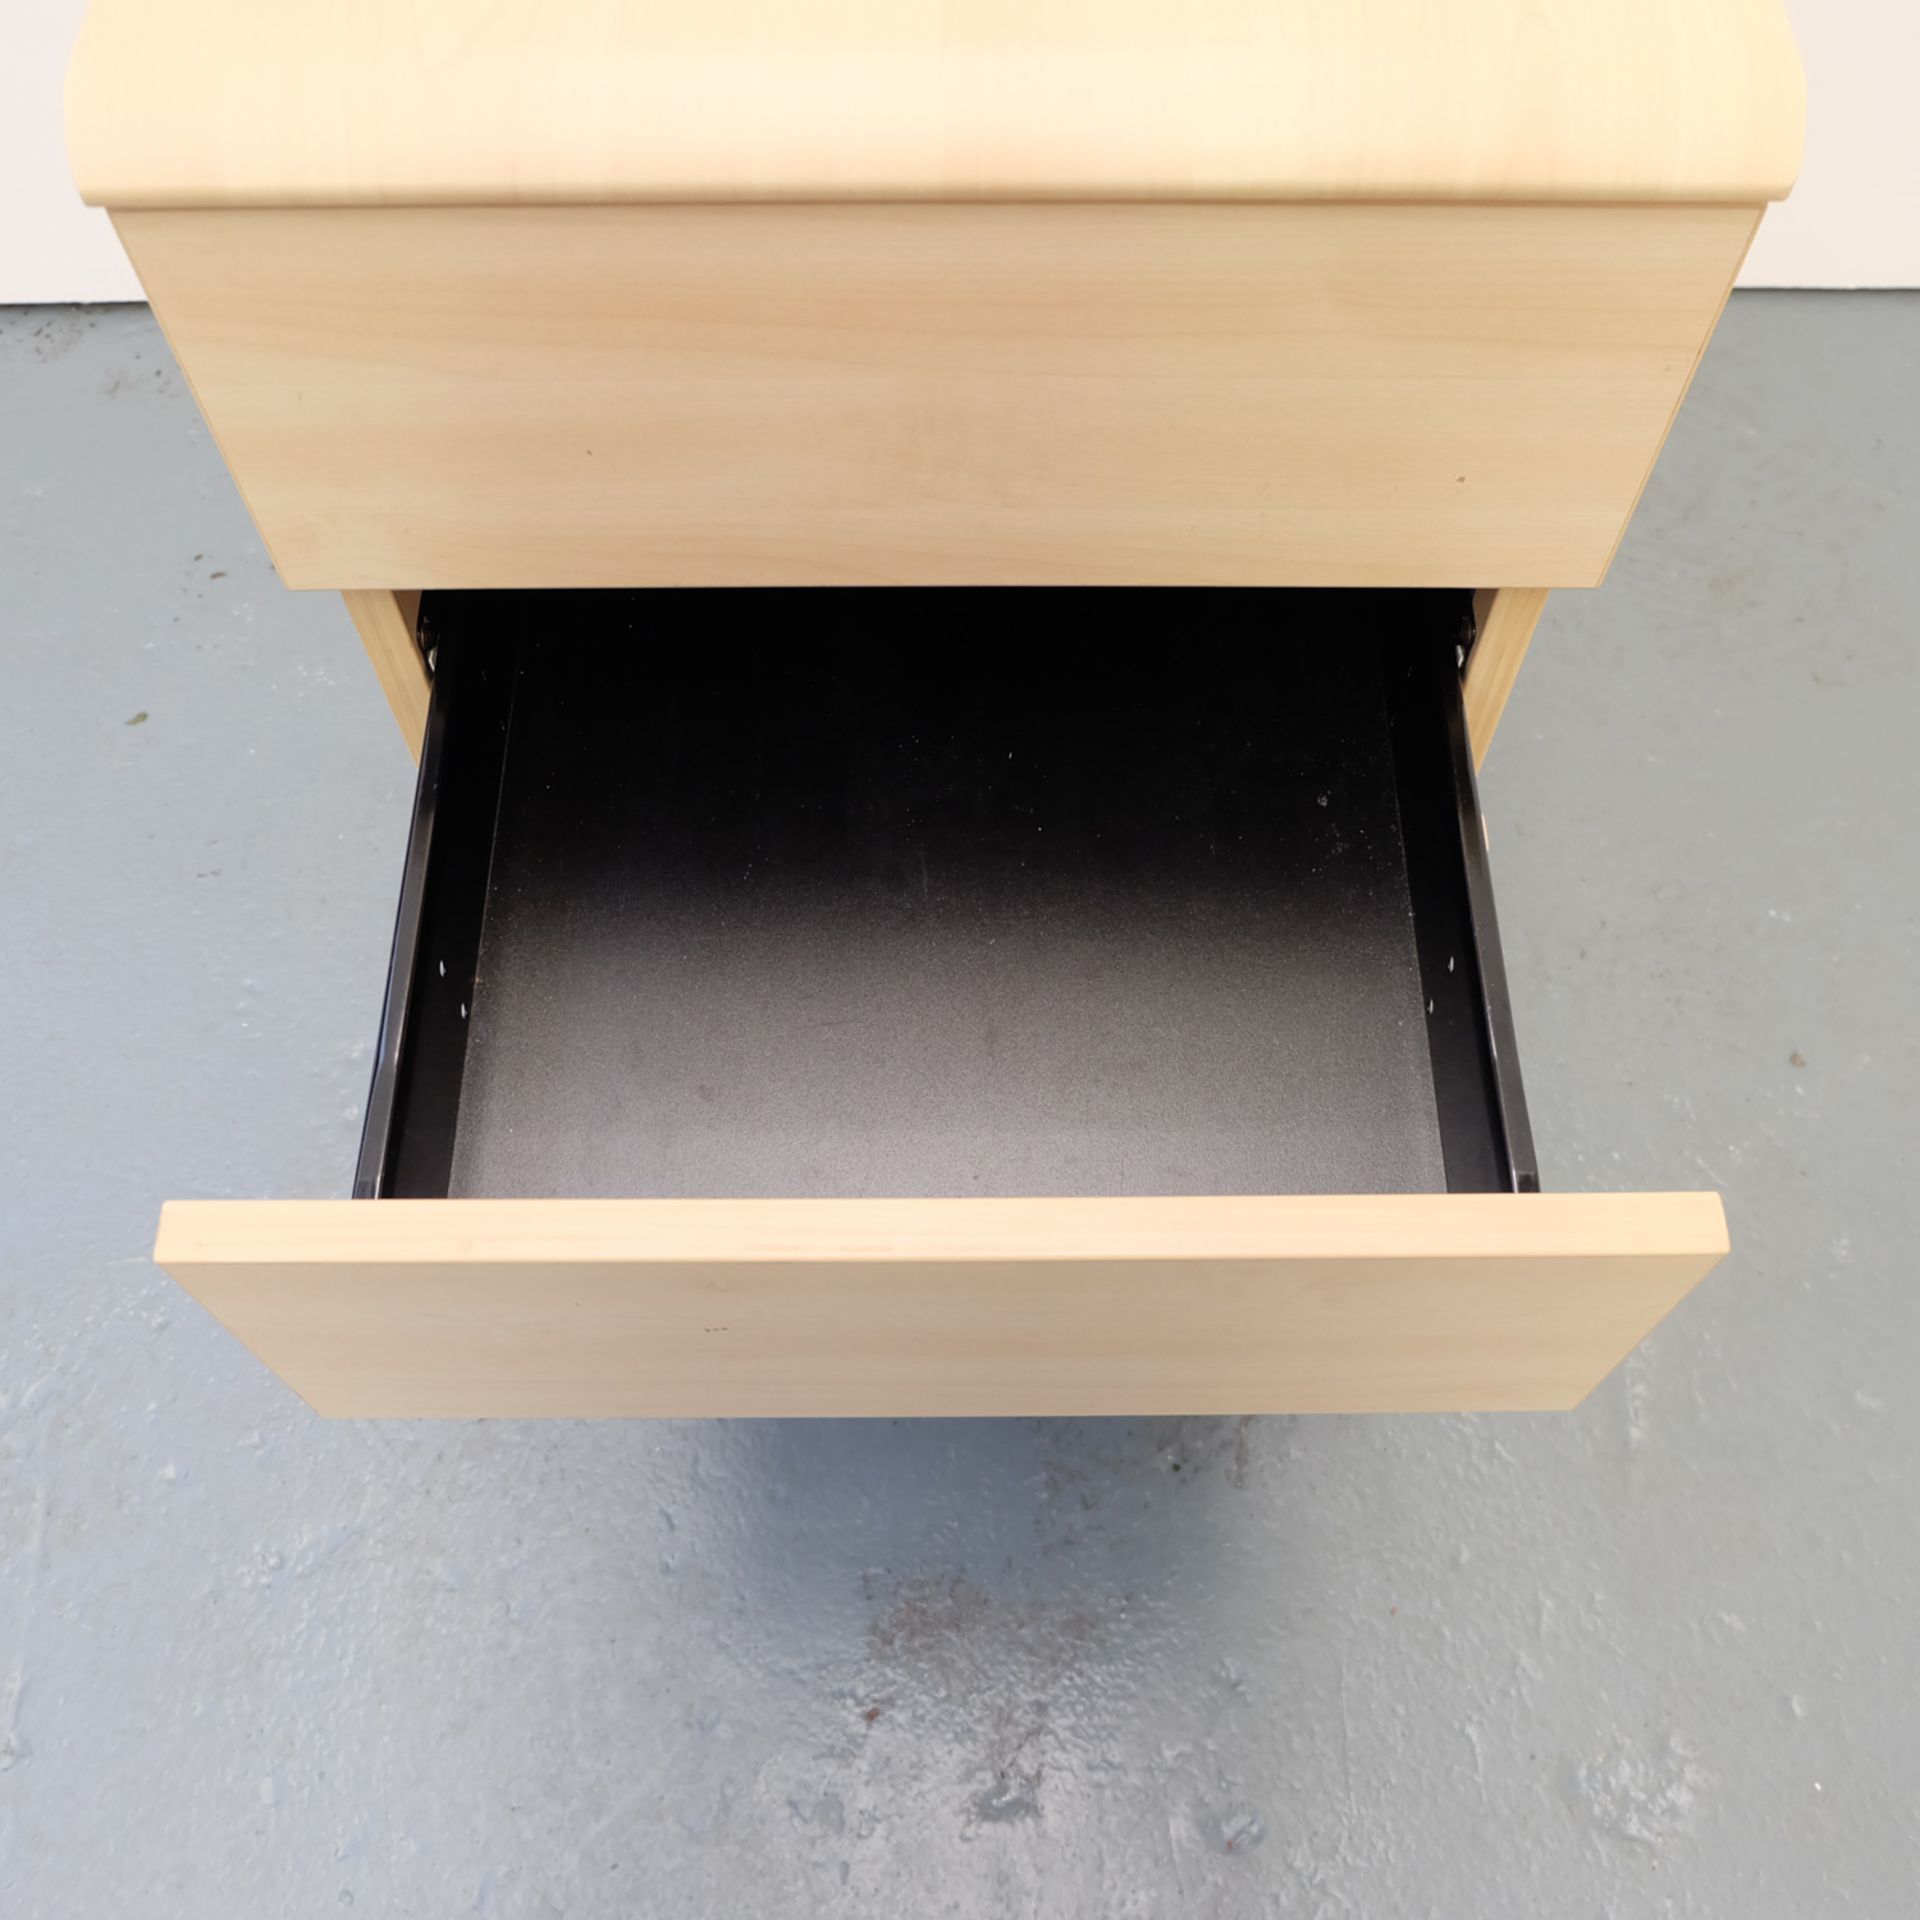 Set of Office Drawers. Dimensions 430mm x 600mm x 730mm High Approx. - Image 5 of 6